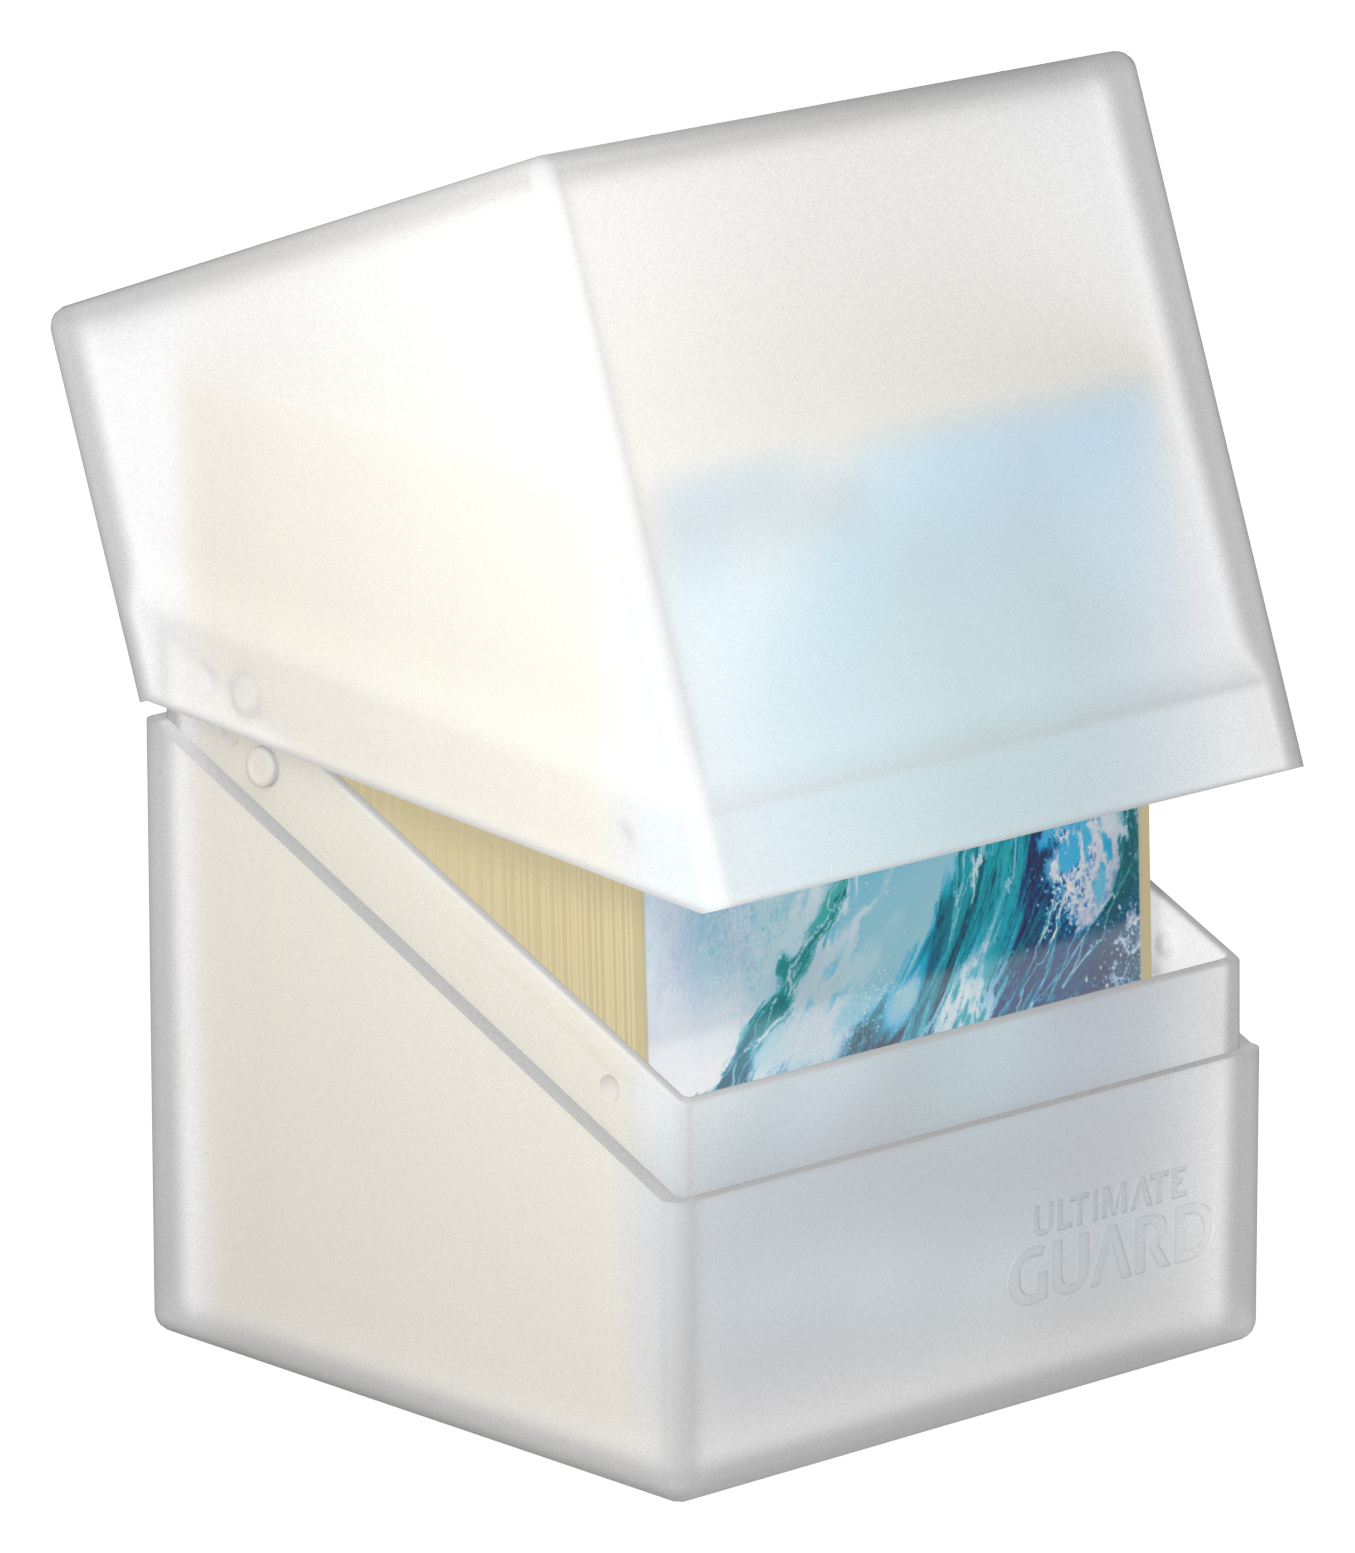 NEW Card Storage Box ULTIMATE GUARD BOULDER FROSTED Standard Size DECK CASE 100 